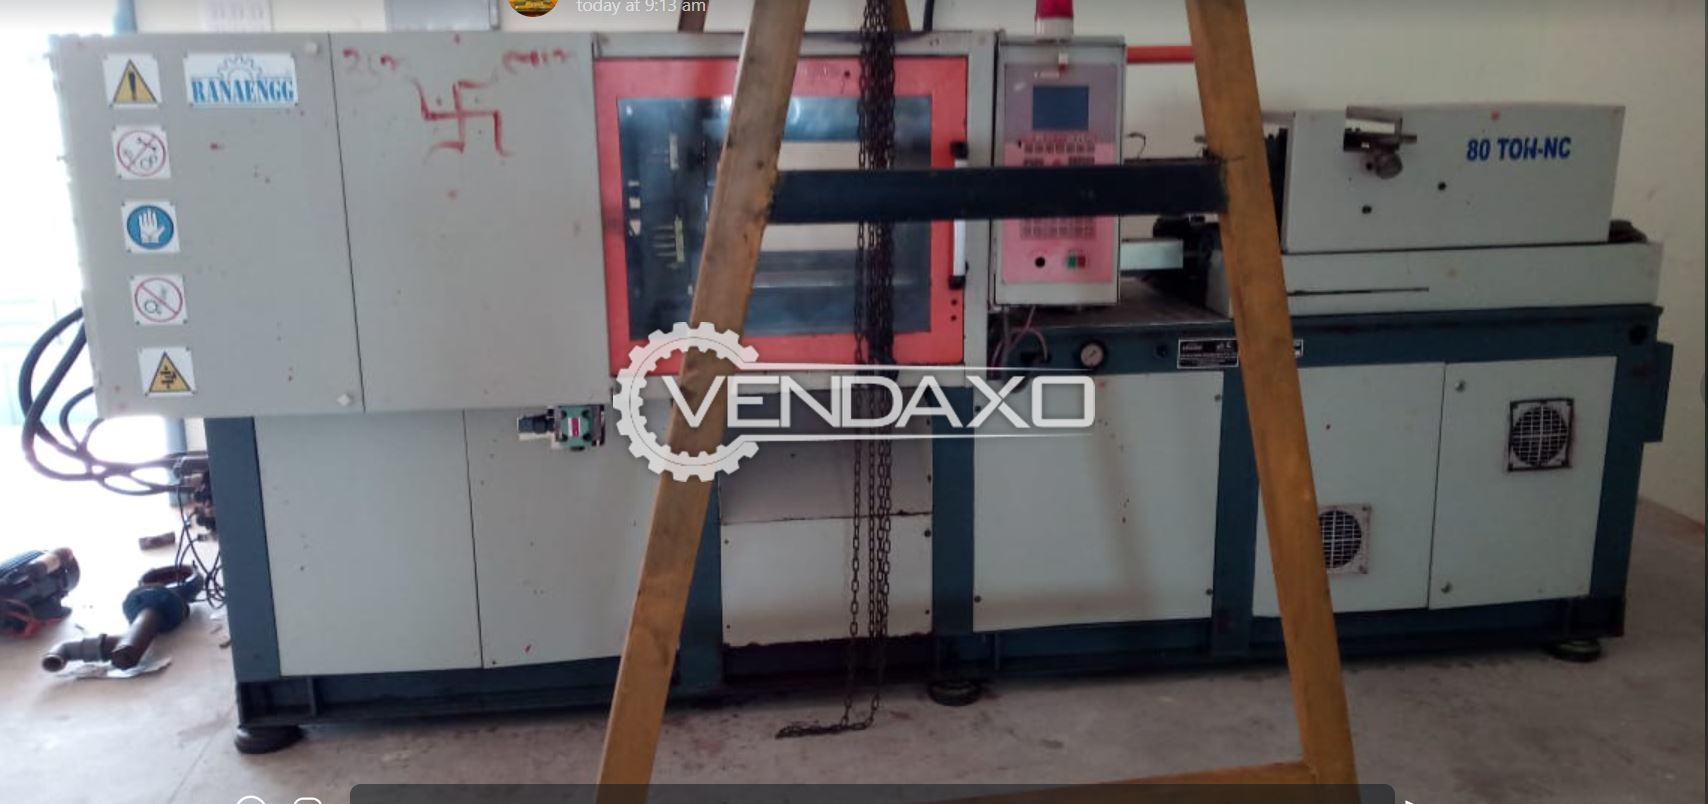 Rana & Sons Injection Moulding Machine - 80 Ton, 2015 Model